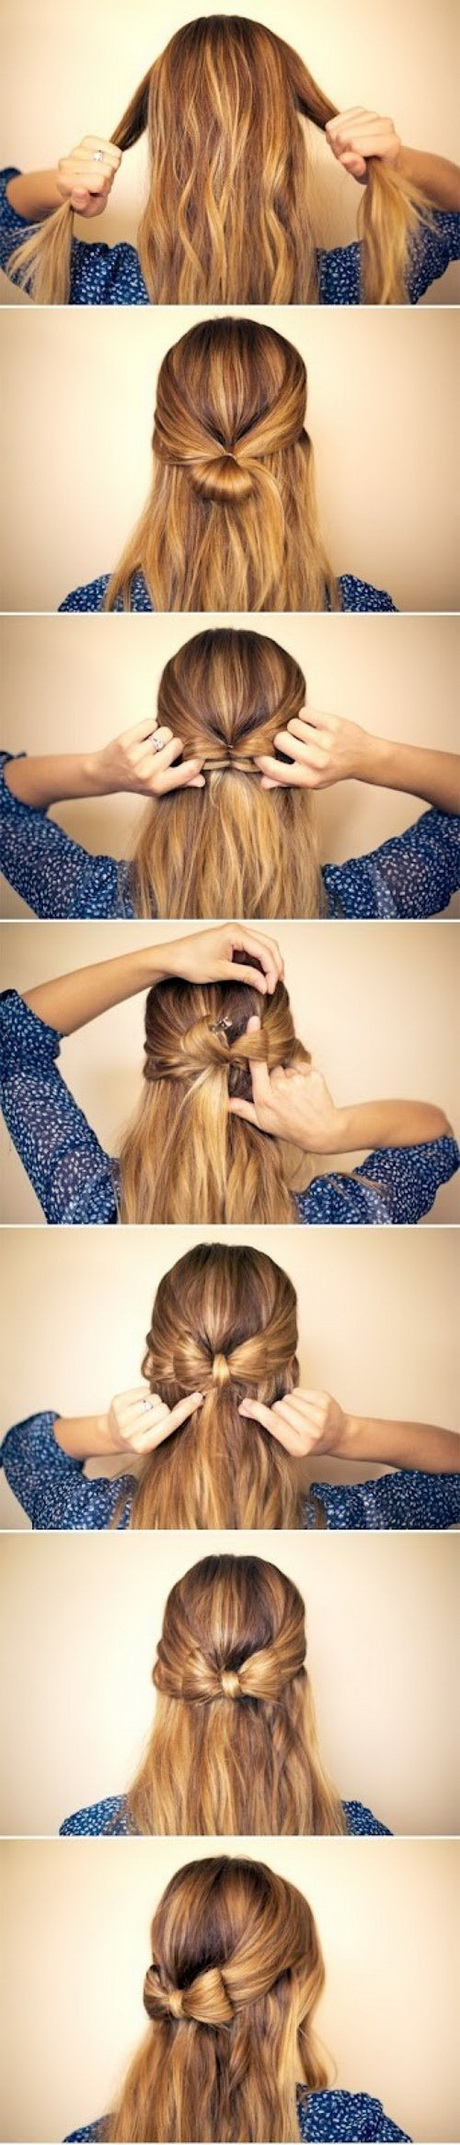 easy-to-do-braided-hairstyles-96_16 Easy to do braided hairstyles